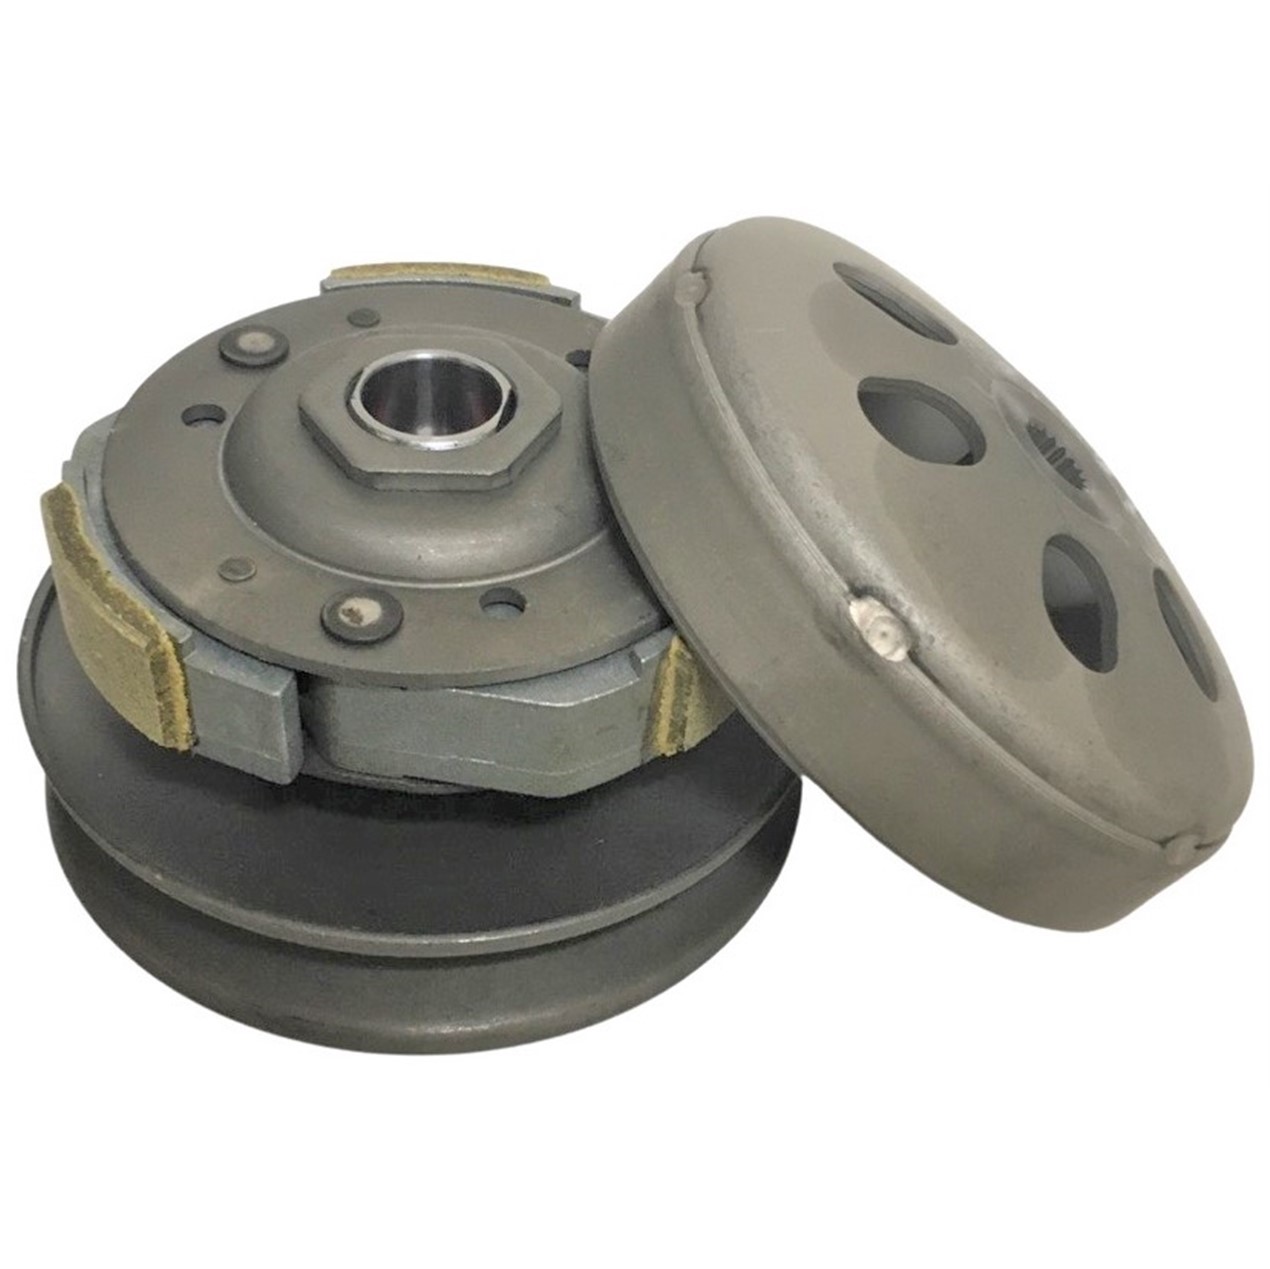 Rear Drive Clutch-Driven Pulley GY6-125, GY6-150 Chinese ATVs, GoKarts, Scooters Bell ID=125mm, Shaft =15mm, Splines=19